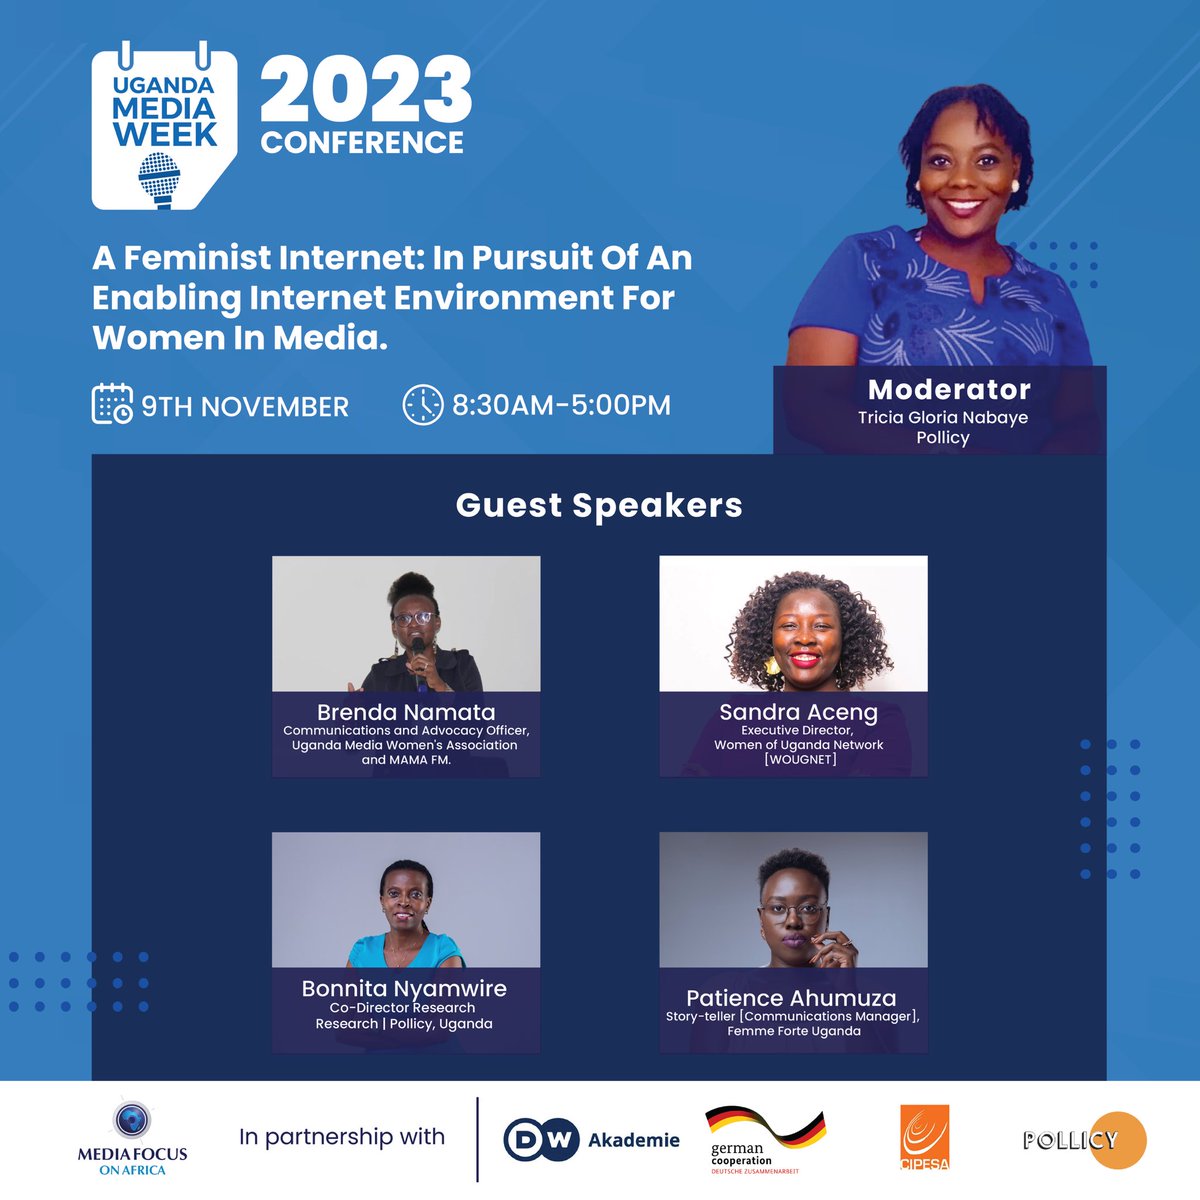 📢 Join us on Nov 9th at 11:30AM EAT for a panel discussion on 'A Feminist Internet: In pursuit of an Enabling Internet Environment for Women in Media' during Uganda Media Week 2023. We'll delve into issues of online safety, and more.
 #FeministInternet #UgandaMediaWeek